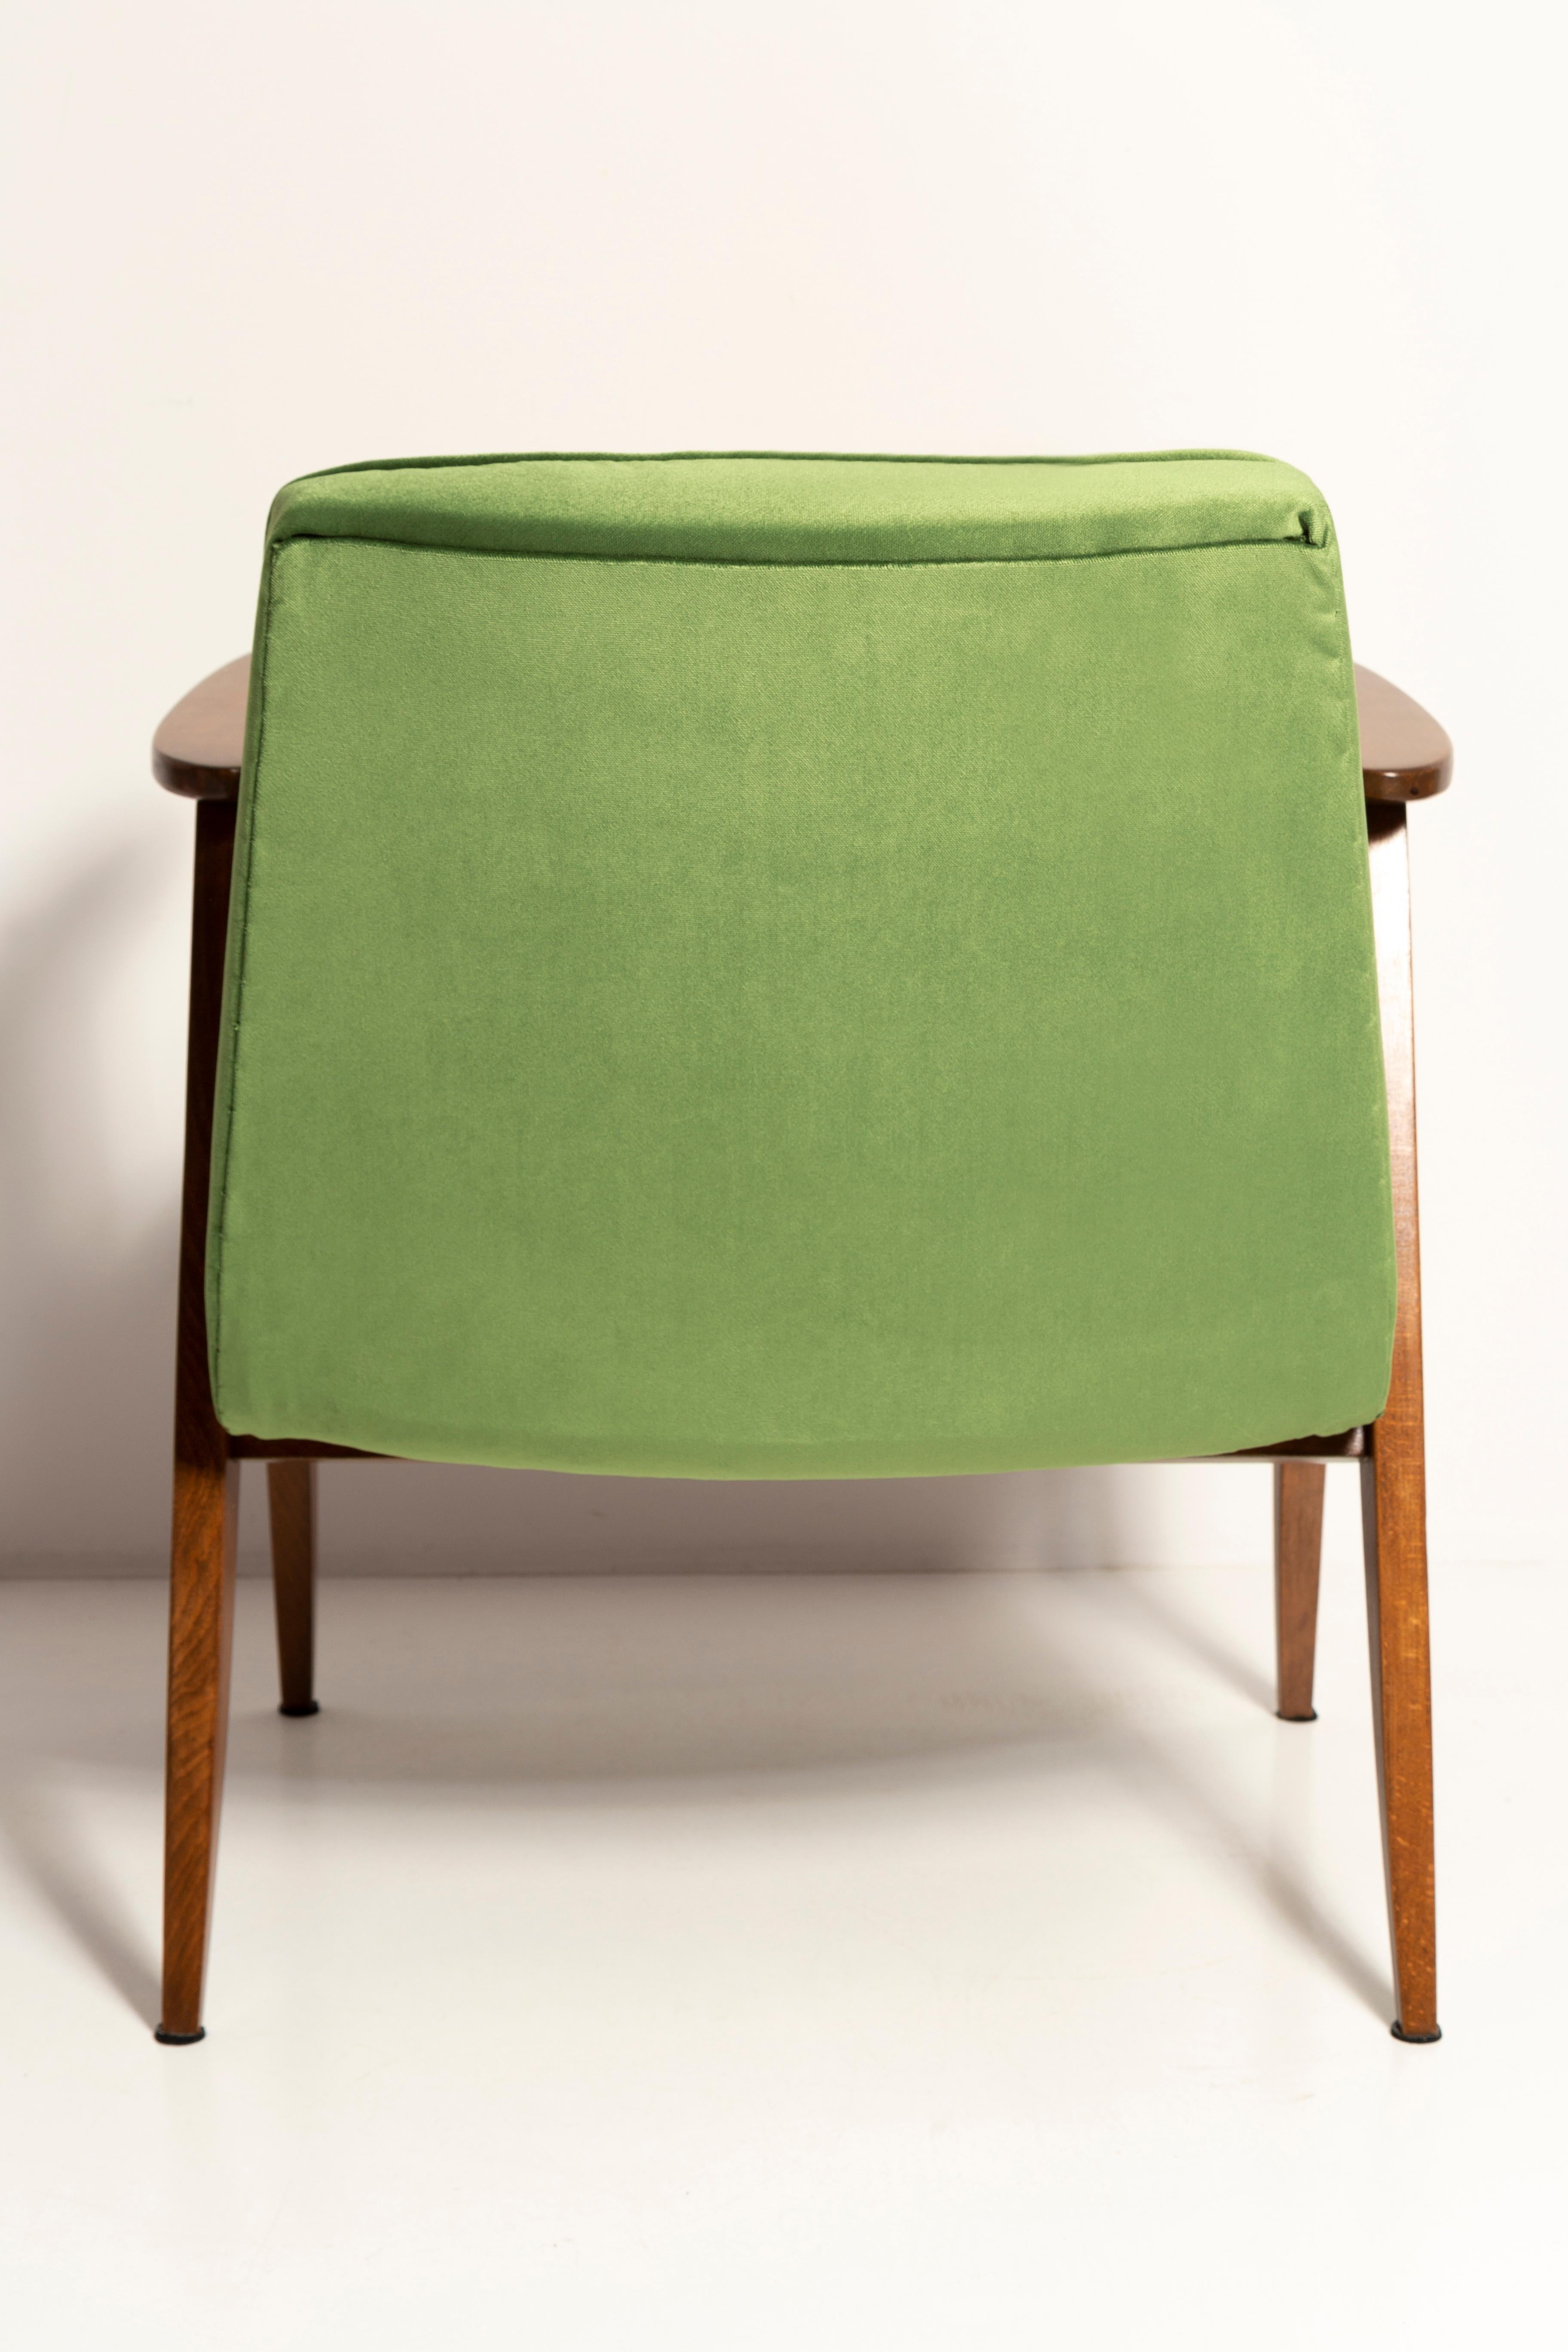 Textile Pair of Mid-Century 366 Armchairs, Green and Orange, by Chierowski Europe, 1960s For Sale